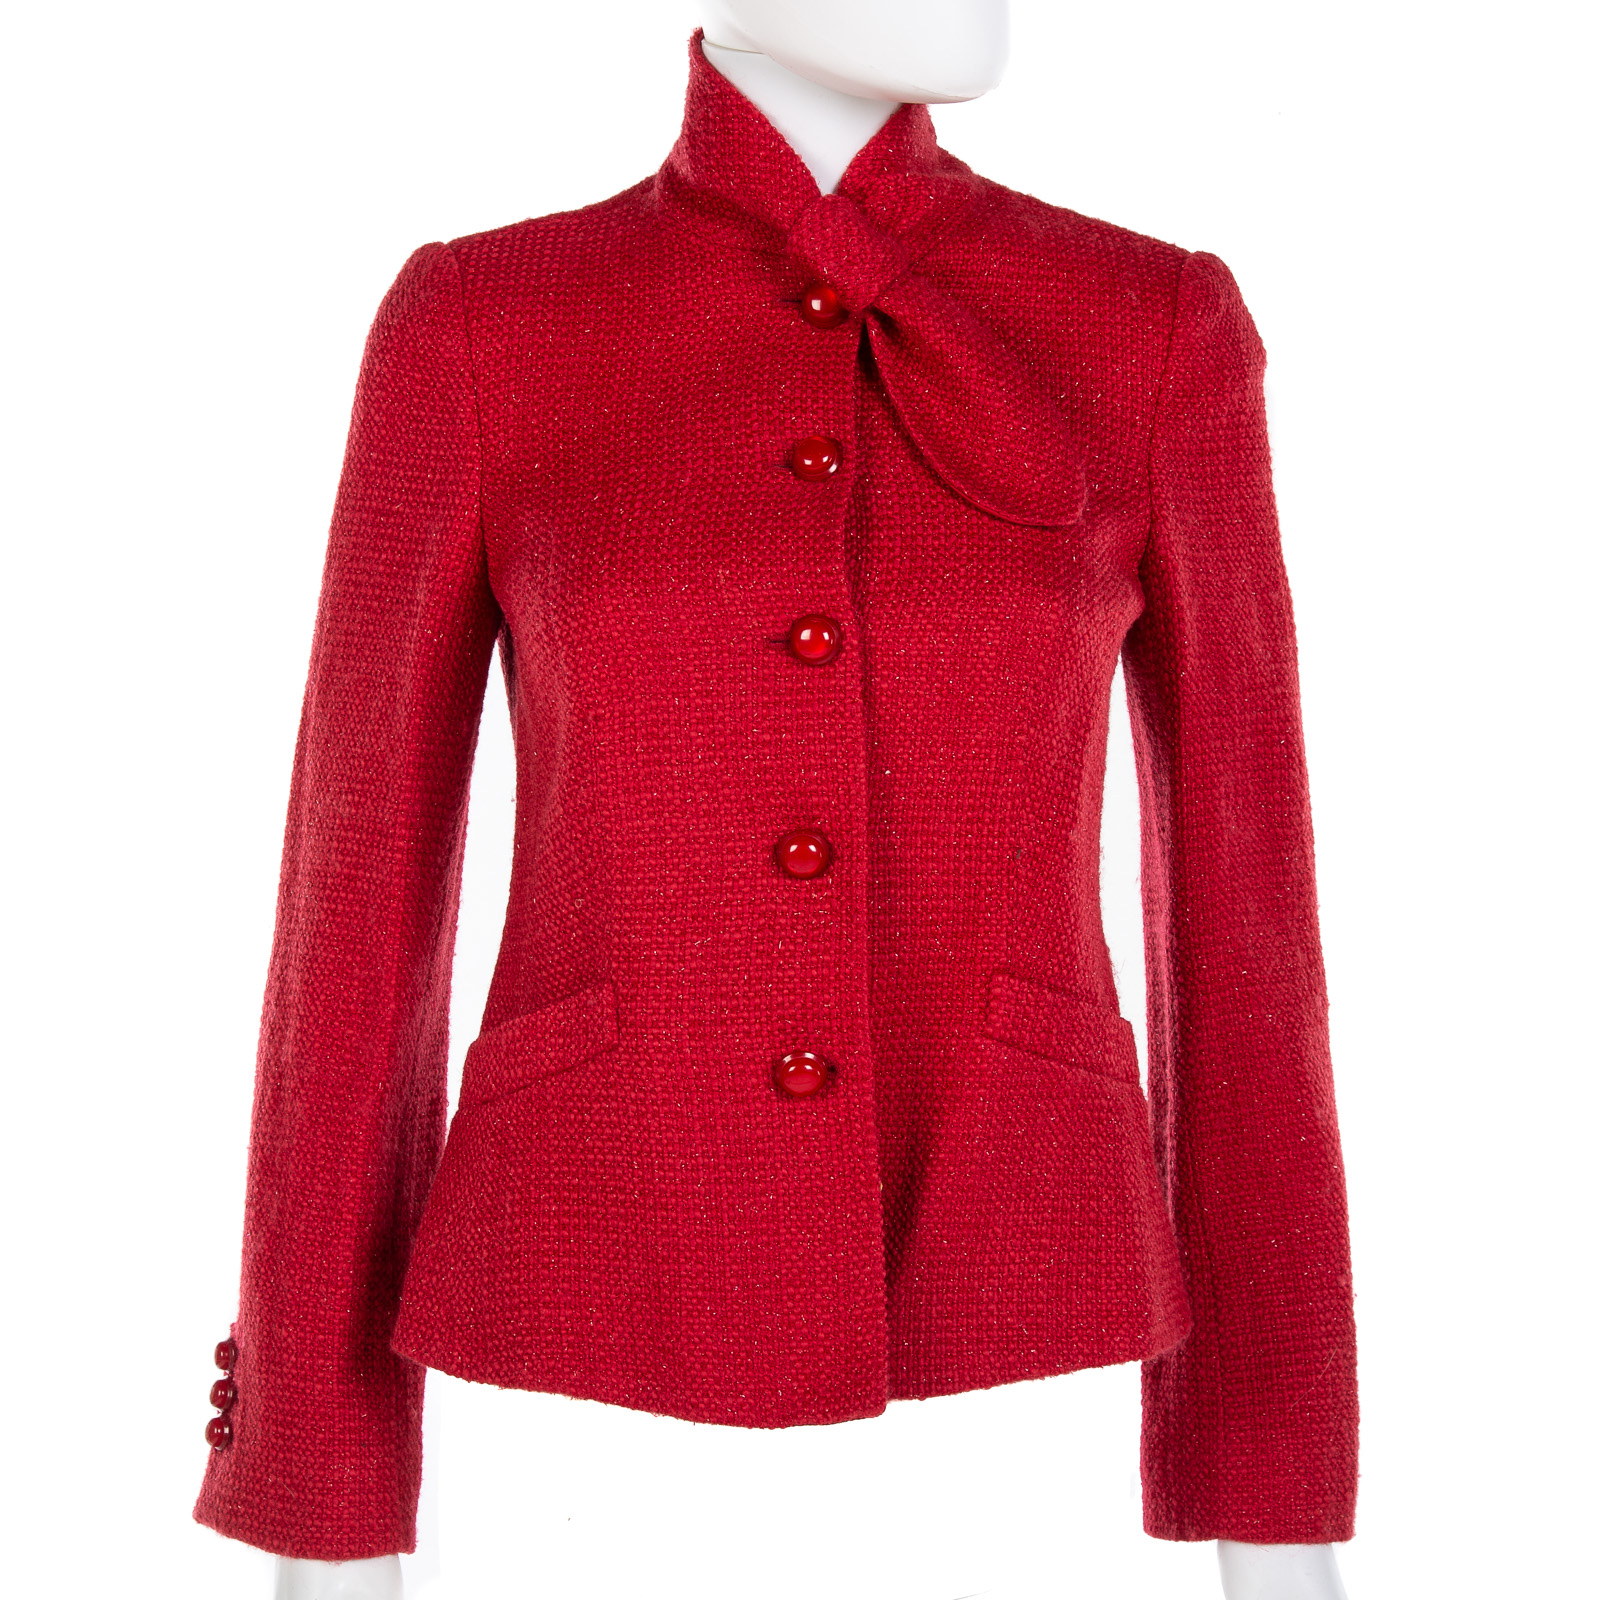 RED TWEED JACKET BY ARMANI COLLEZIONI 33725e